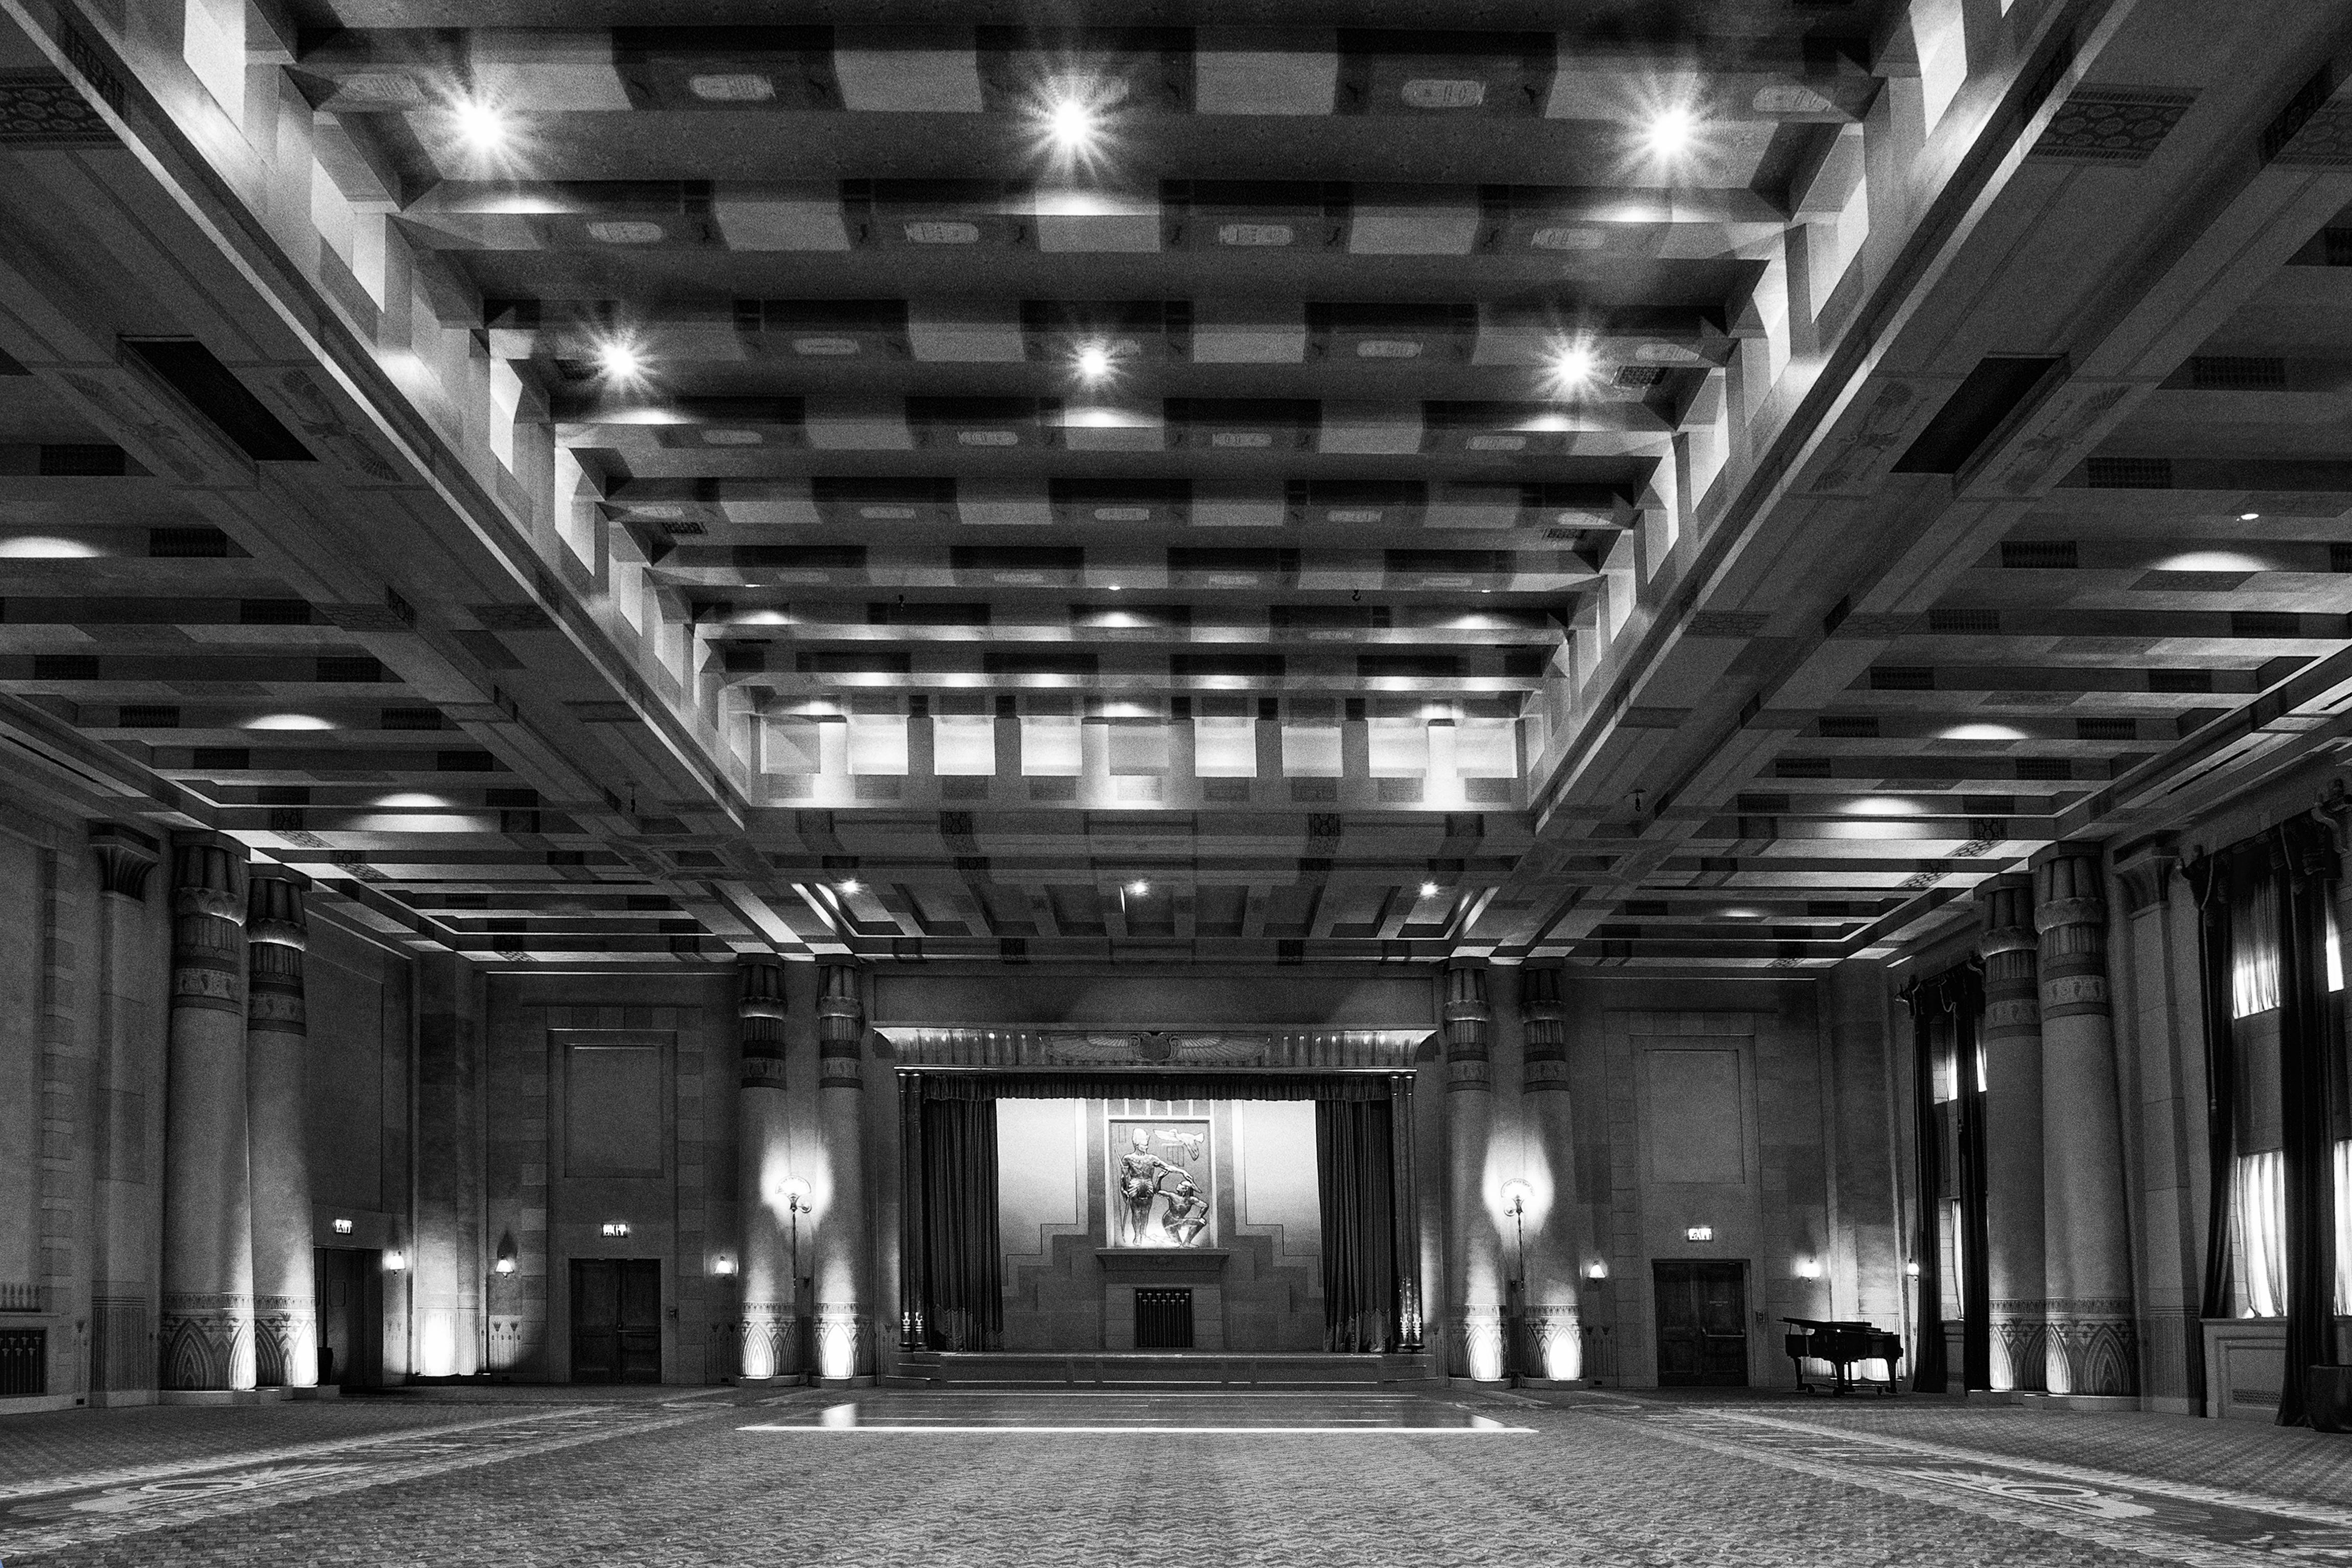 Myrtie Cope Black and White Photograph - "Fox Theatre, Egyptian Ballroom" - architectural photography - Ezra Stoller